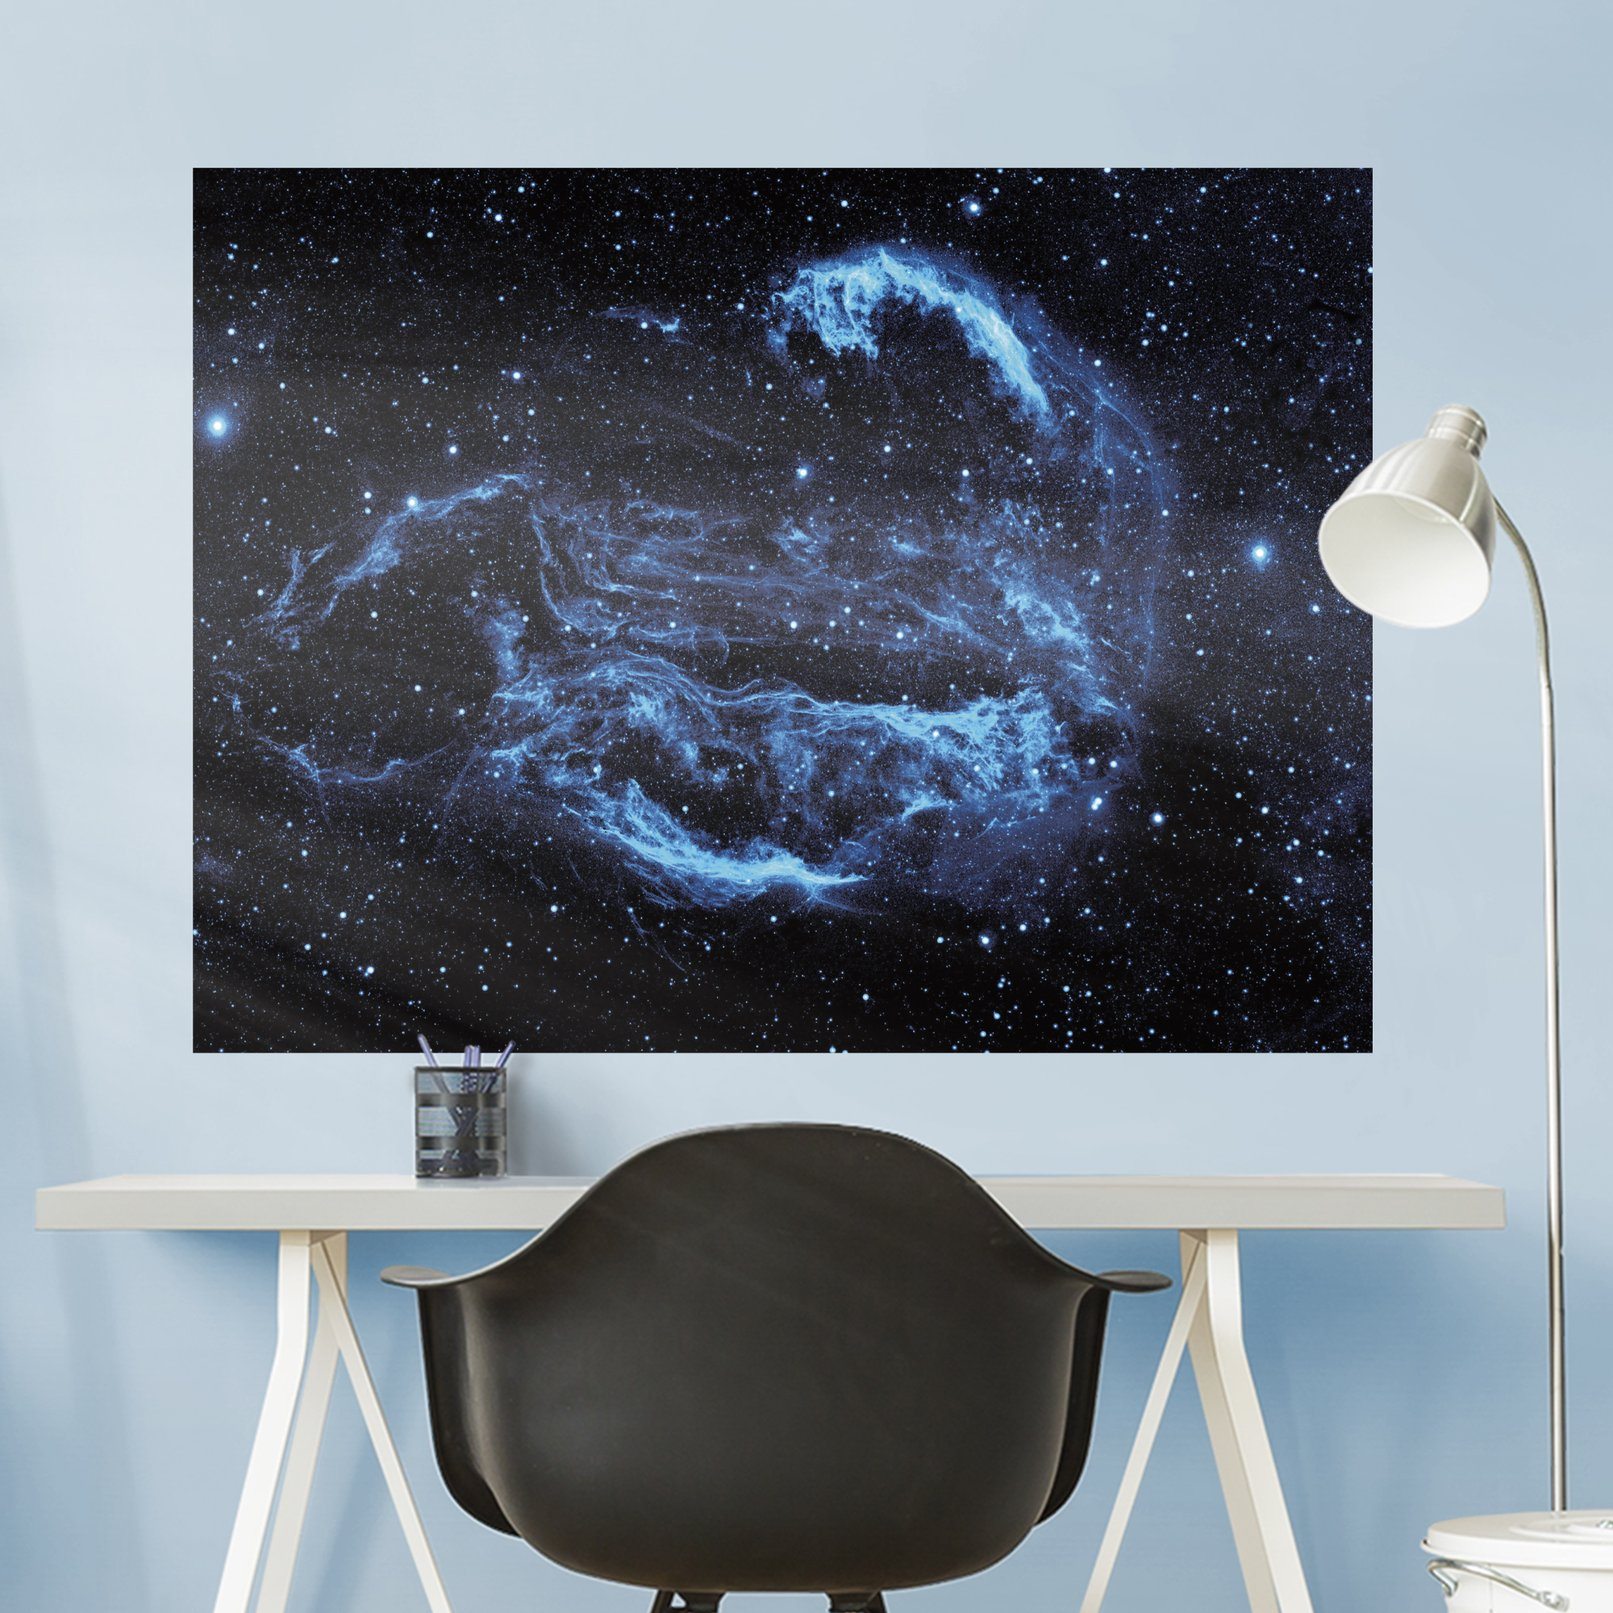 https://fathead.com/collections/space-exploration/products/m1019-00013?variant=33141966012504